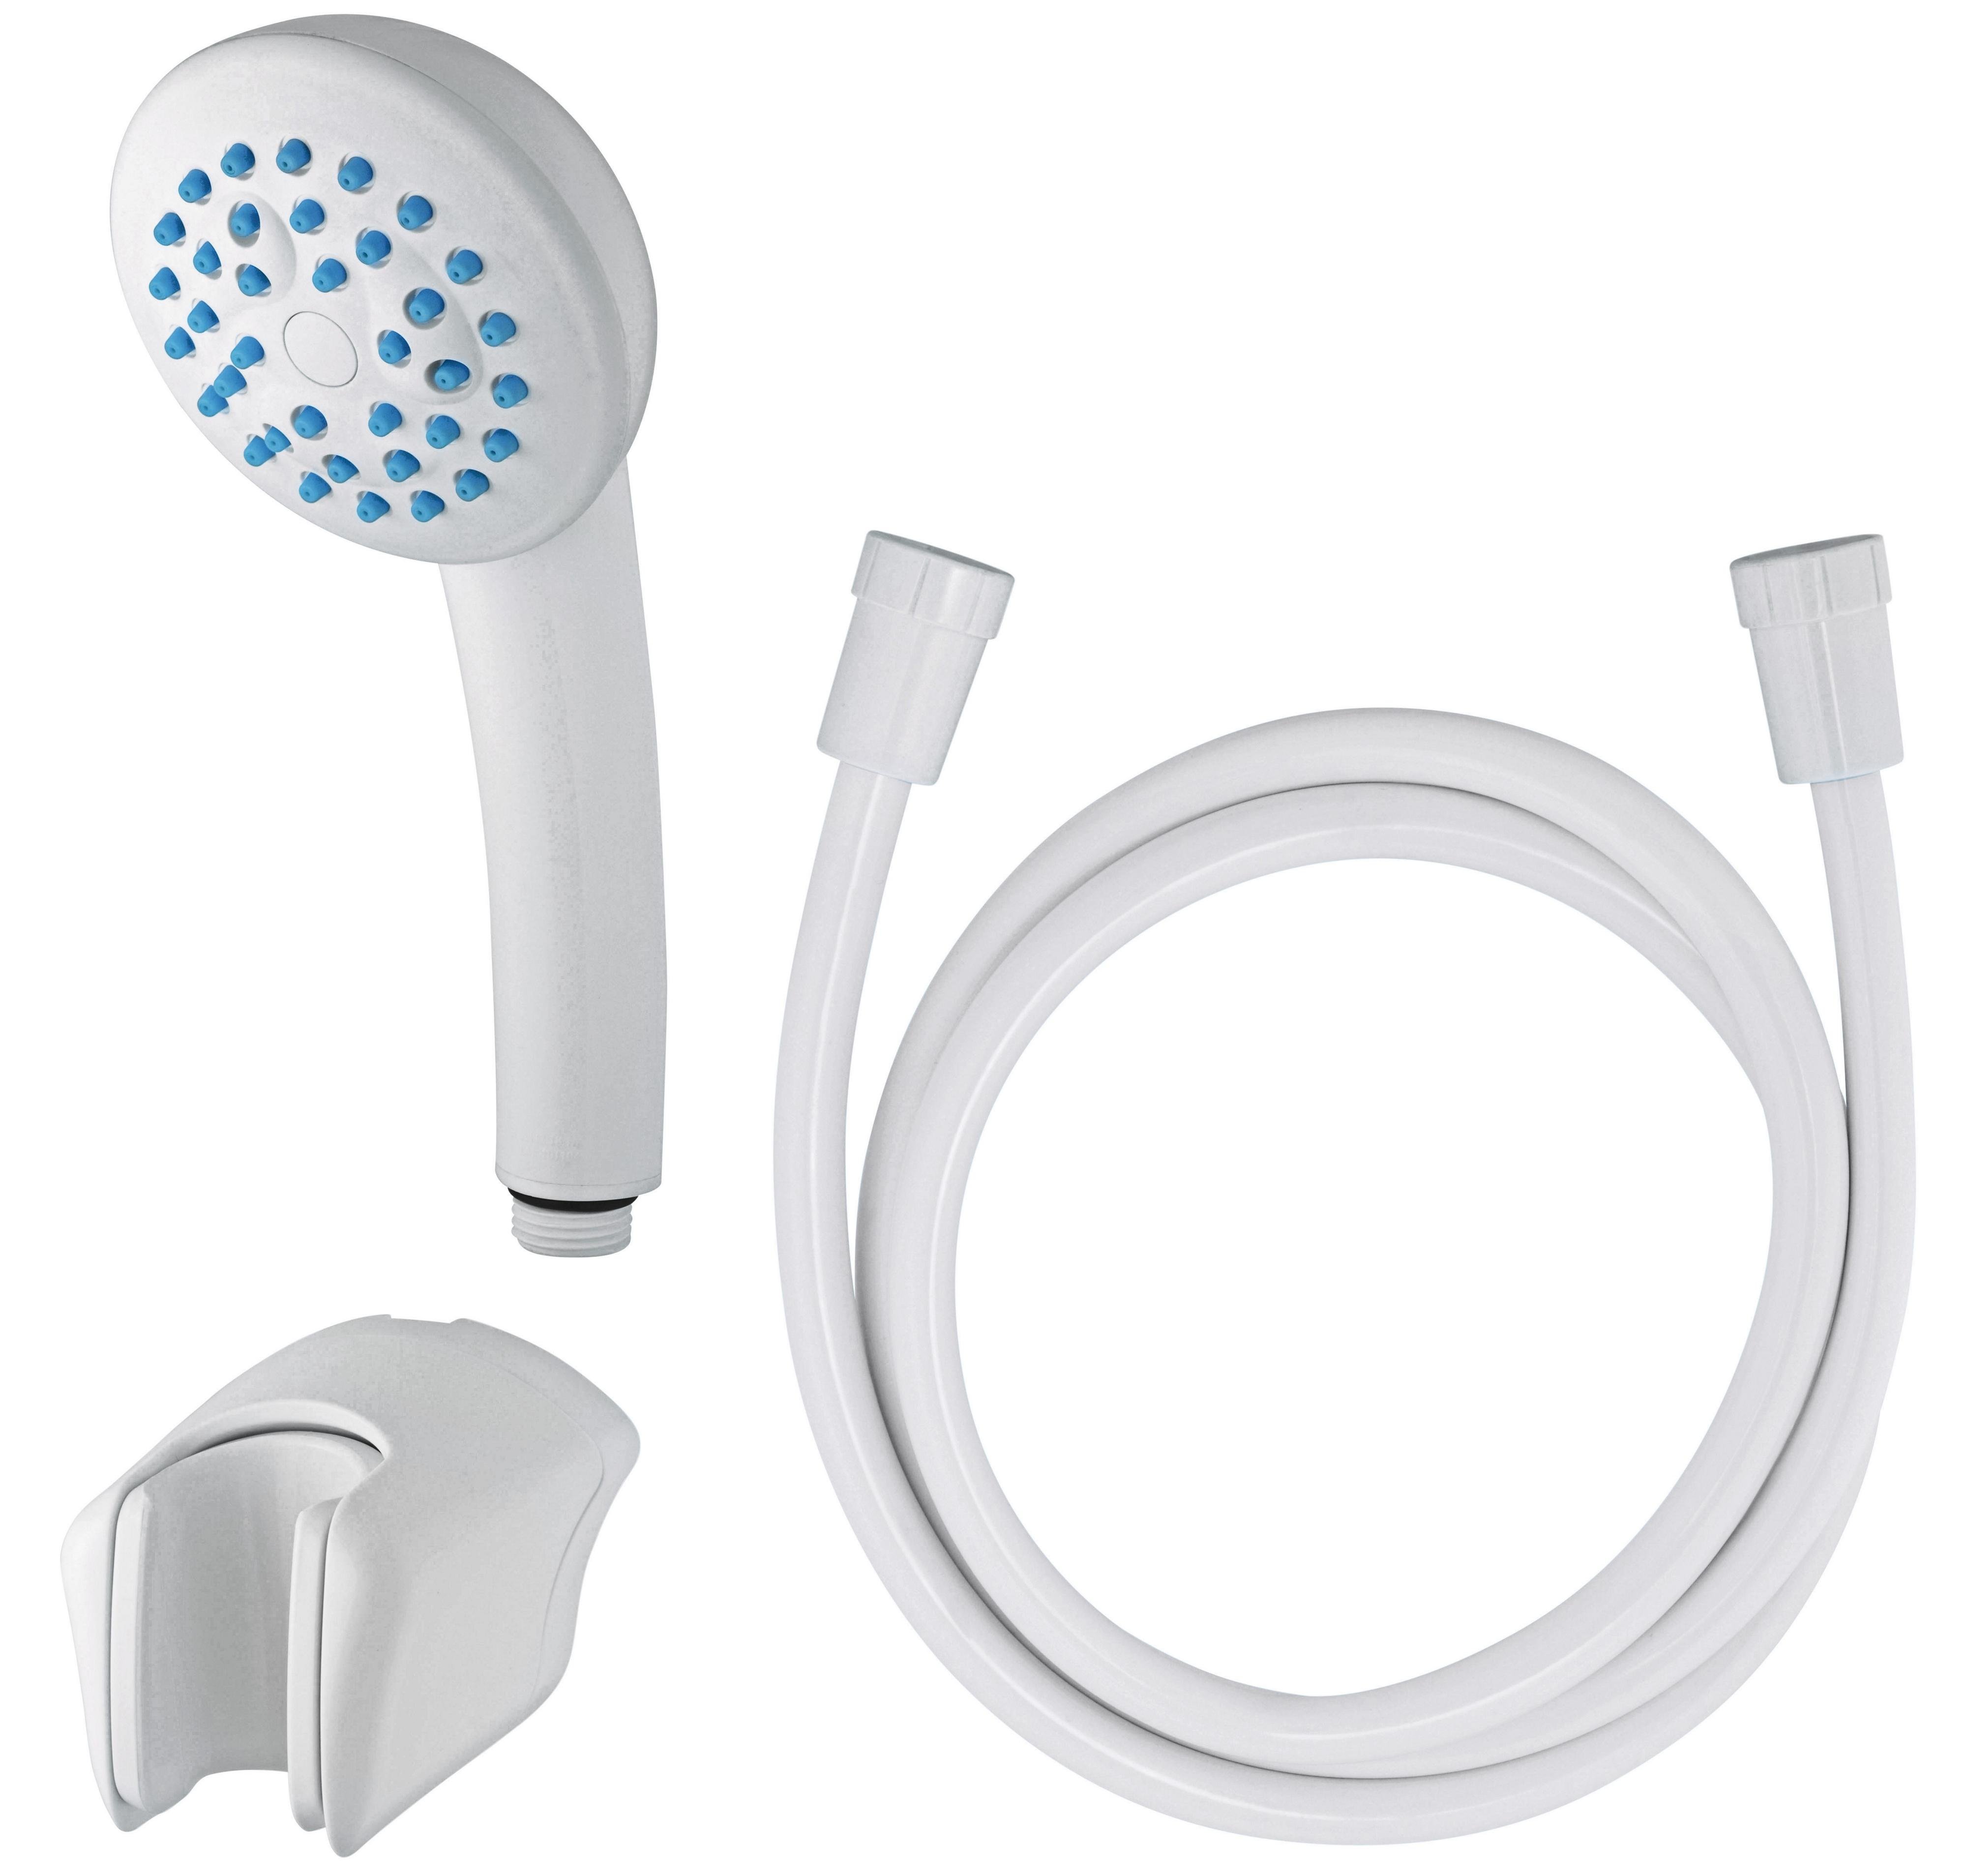 Argos Home Shower Head and Kit - White